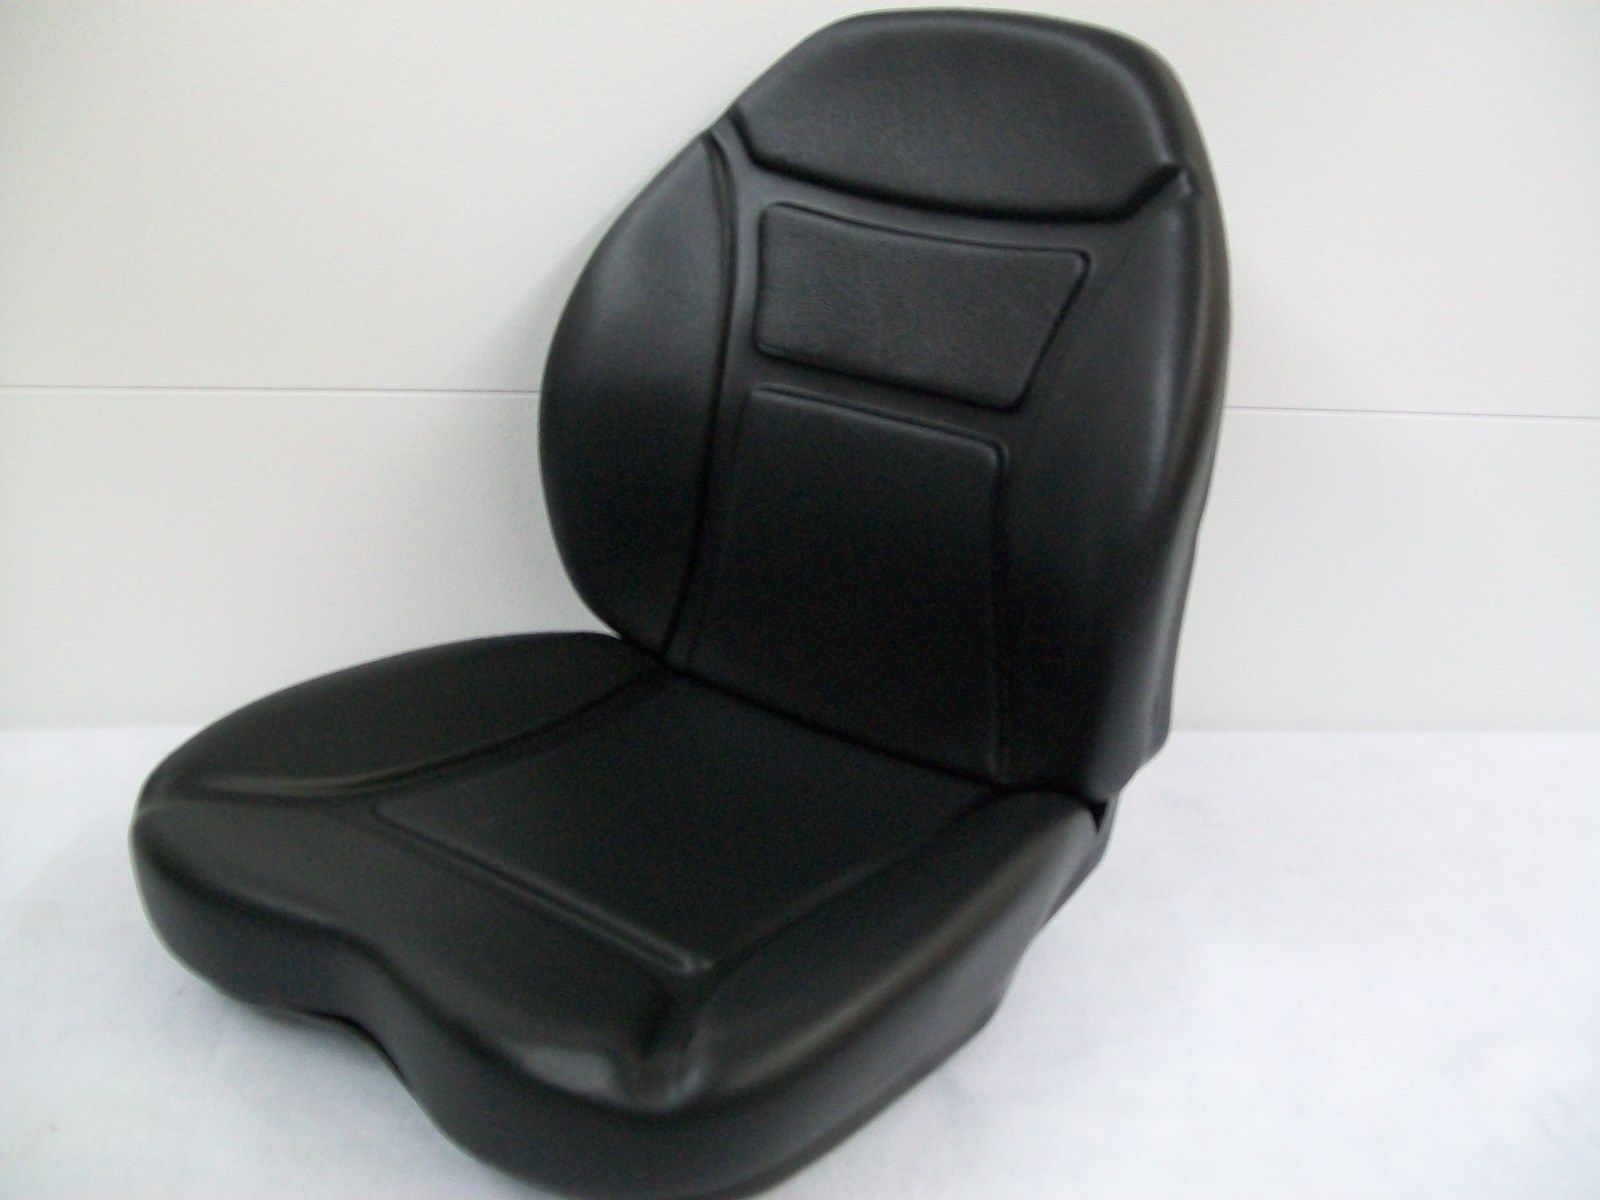 https://seat-warehouse.com/wp-content/uploads/imported/9/Variation-of-BLACKGRAY-SEAT-CUSHION-KIT-SUSPENSION-SEATNEW-HOLLAND-LS170LS180LS190-FY-151696790889-aa02.jpg